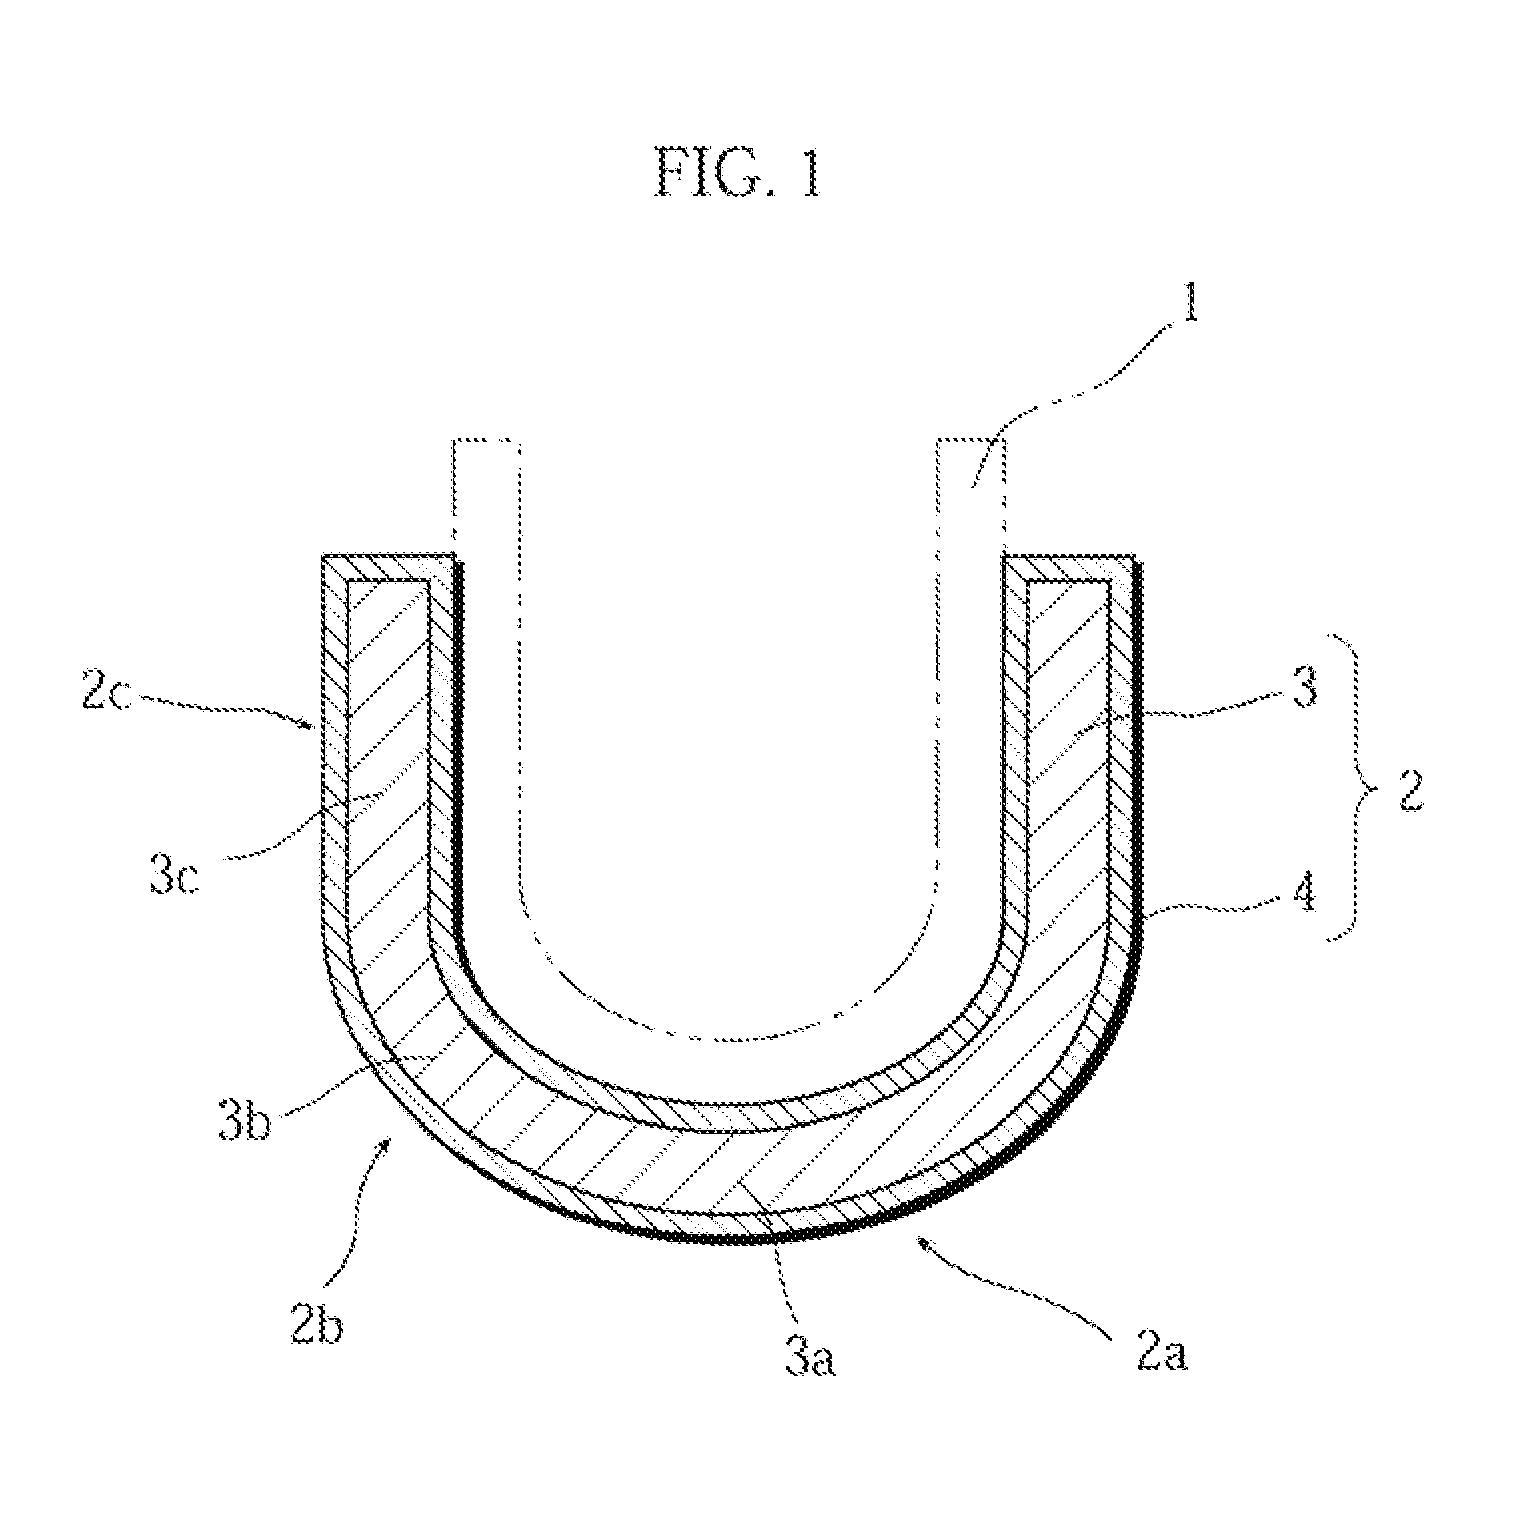 Graphite crucible for single crystal pulling apparatus and method of manufacturing same